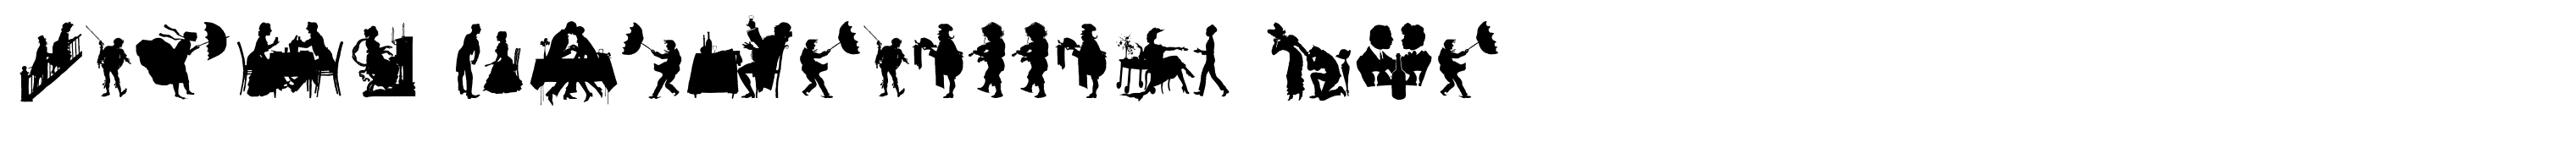 Human Silhouettes Two